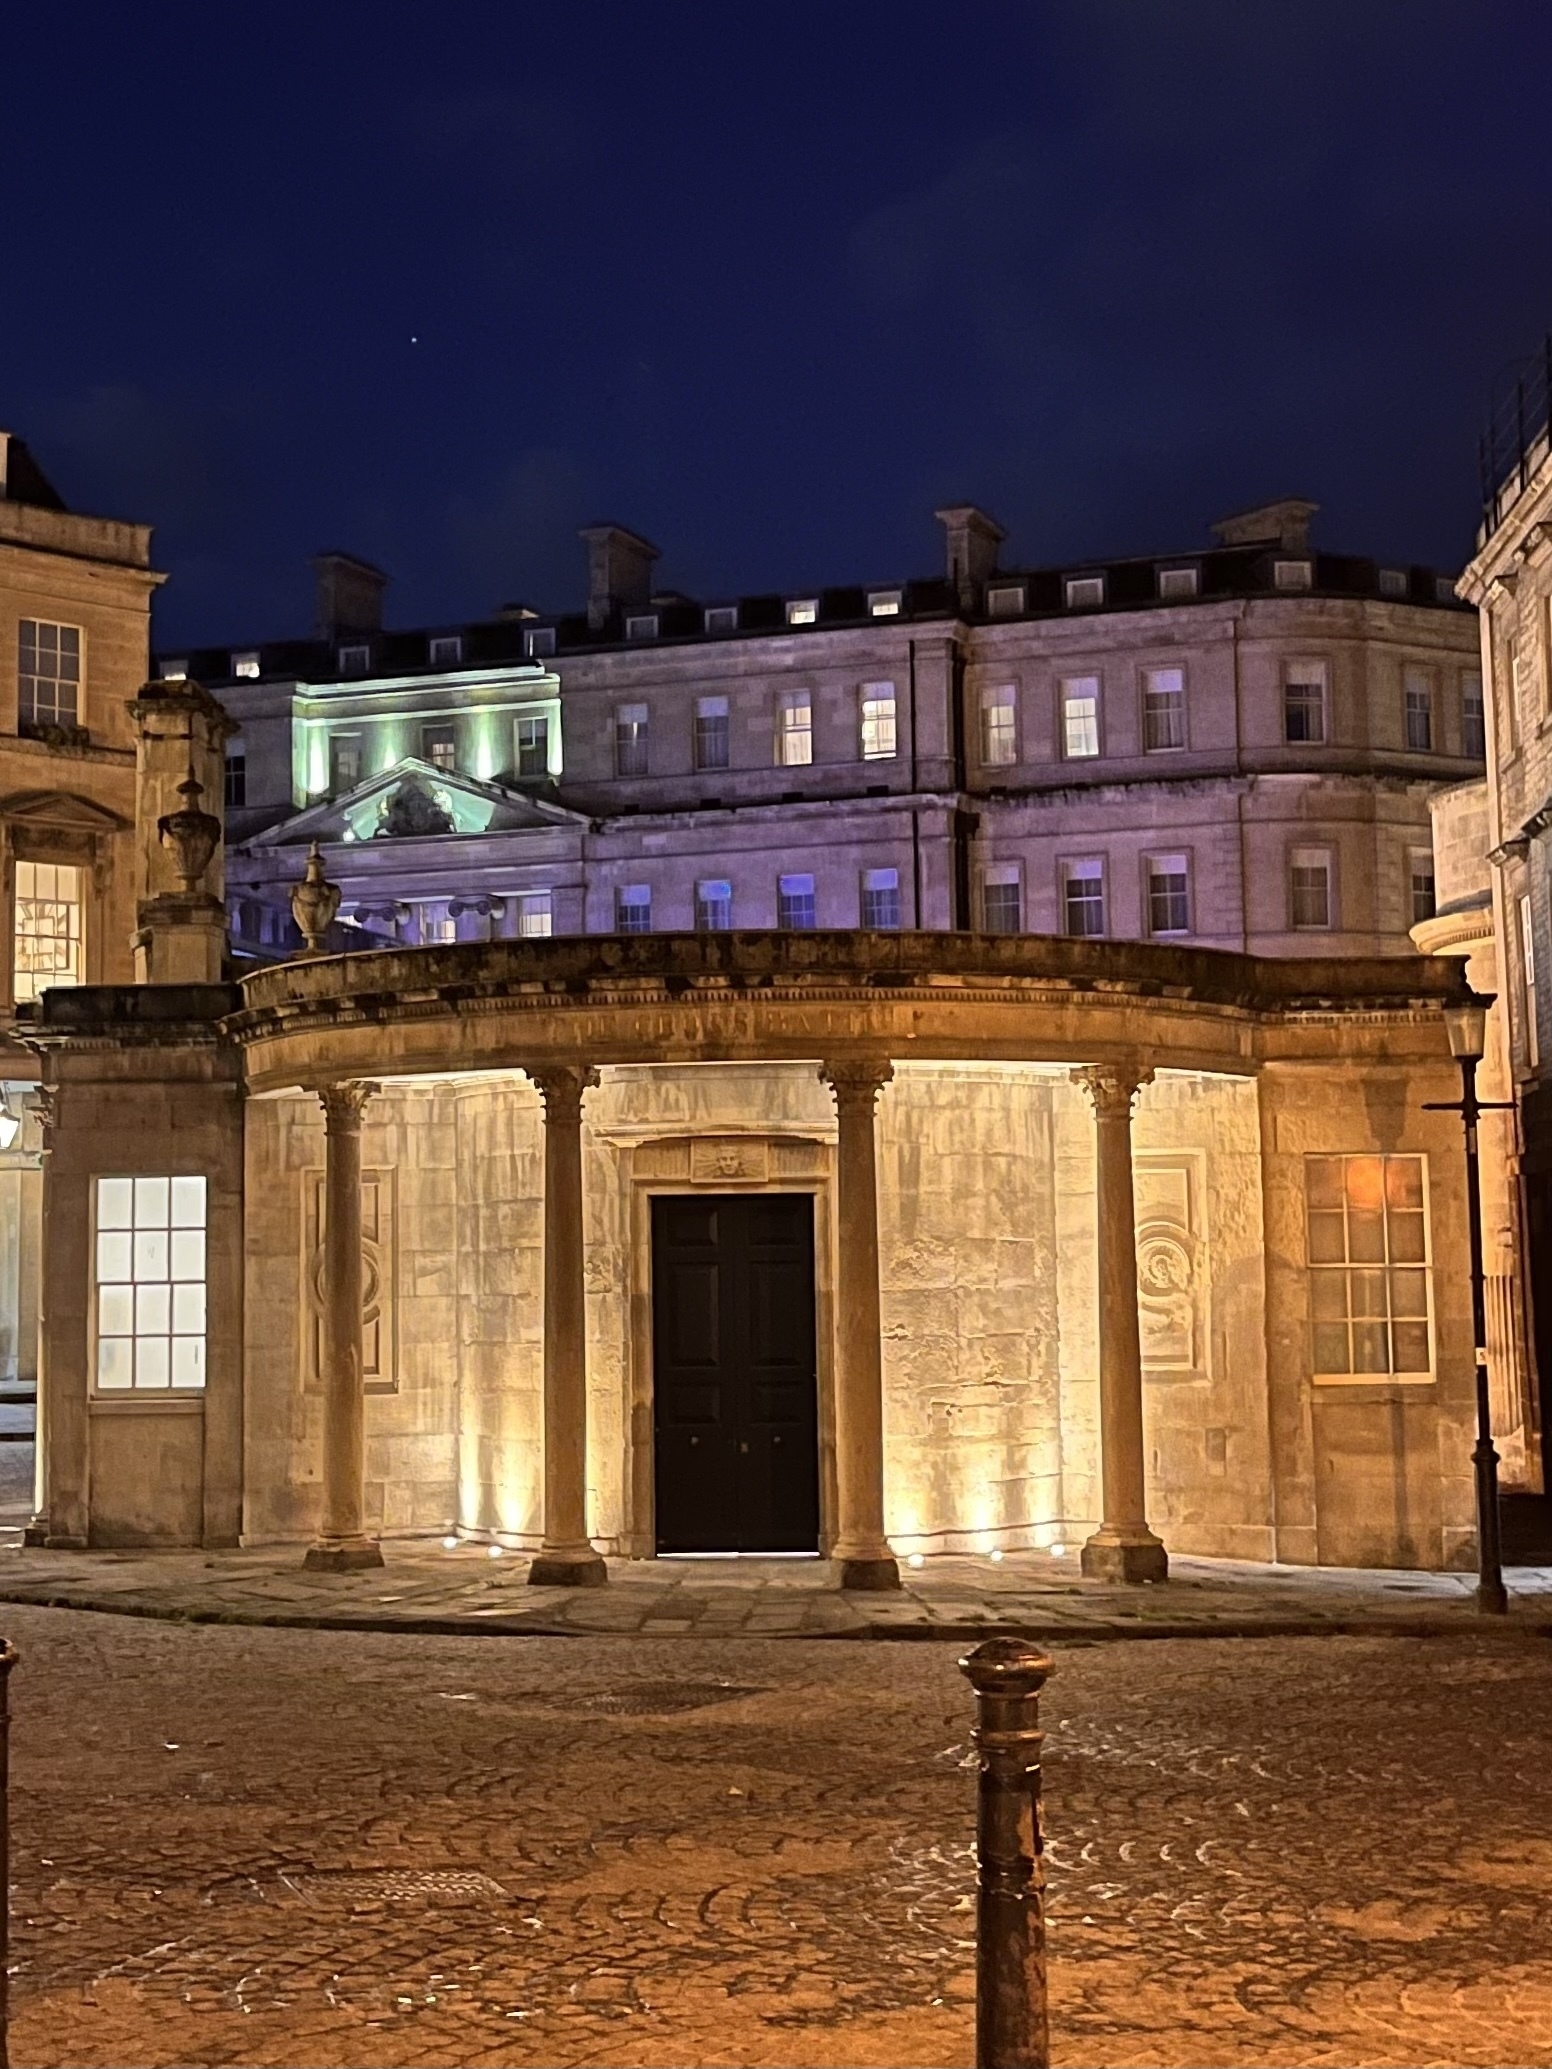 A portico lit up at night in Bath, England